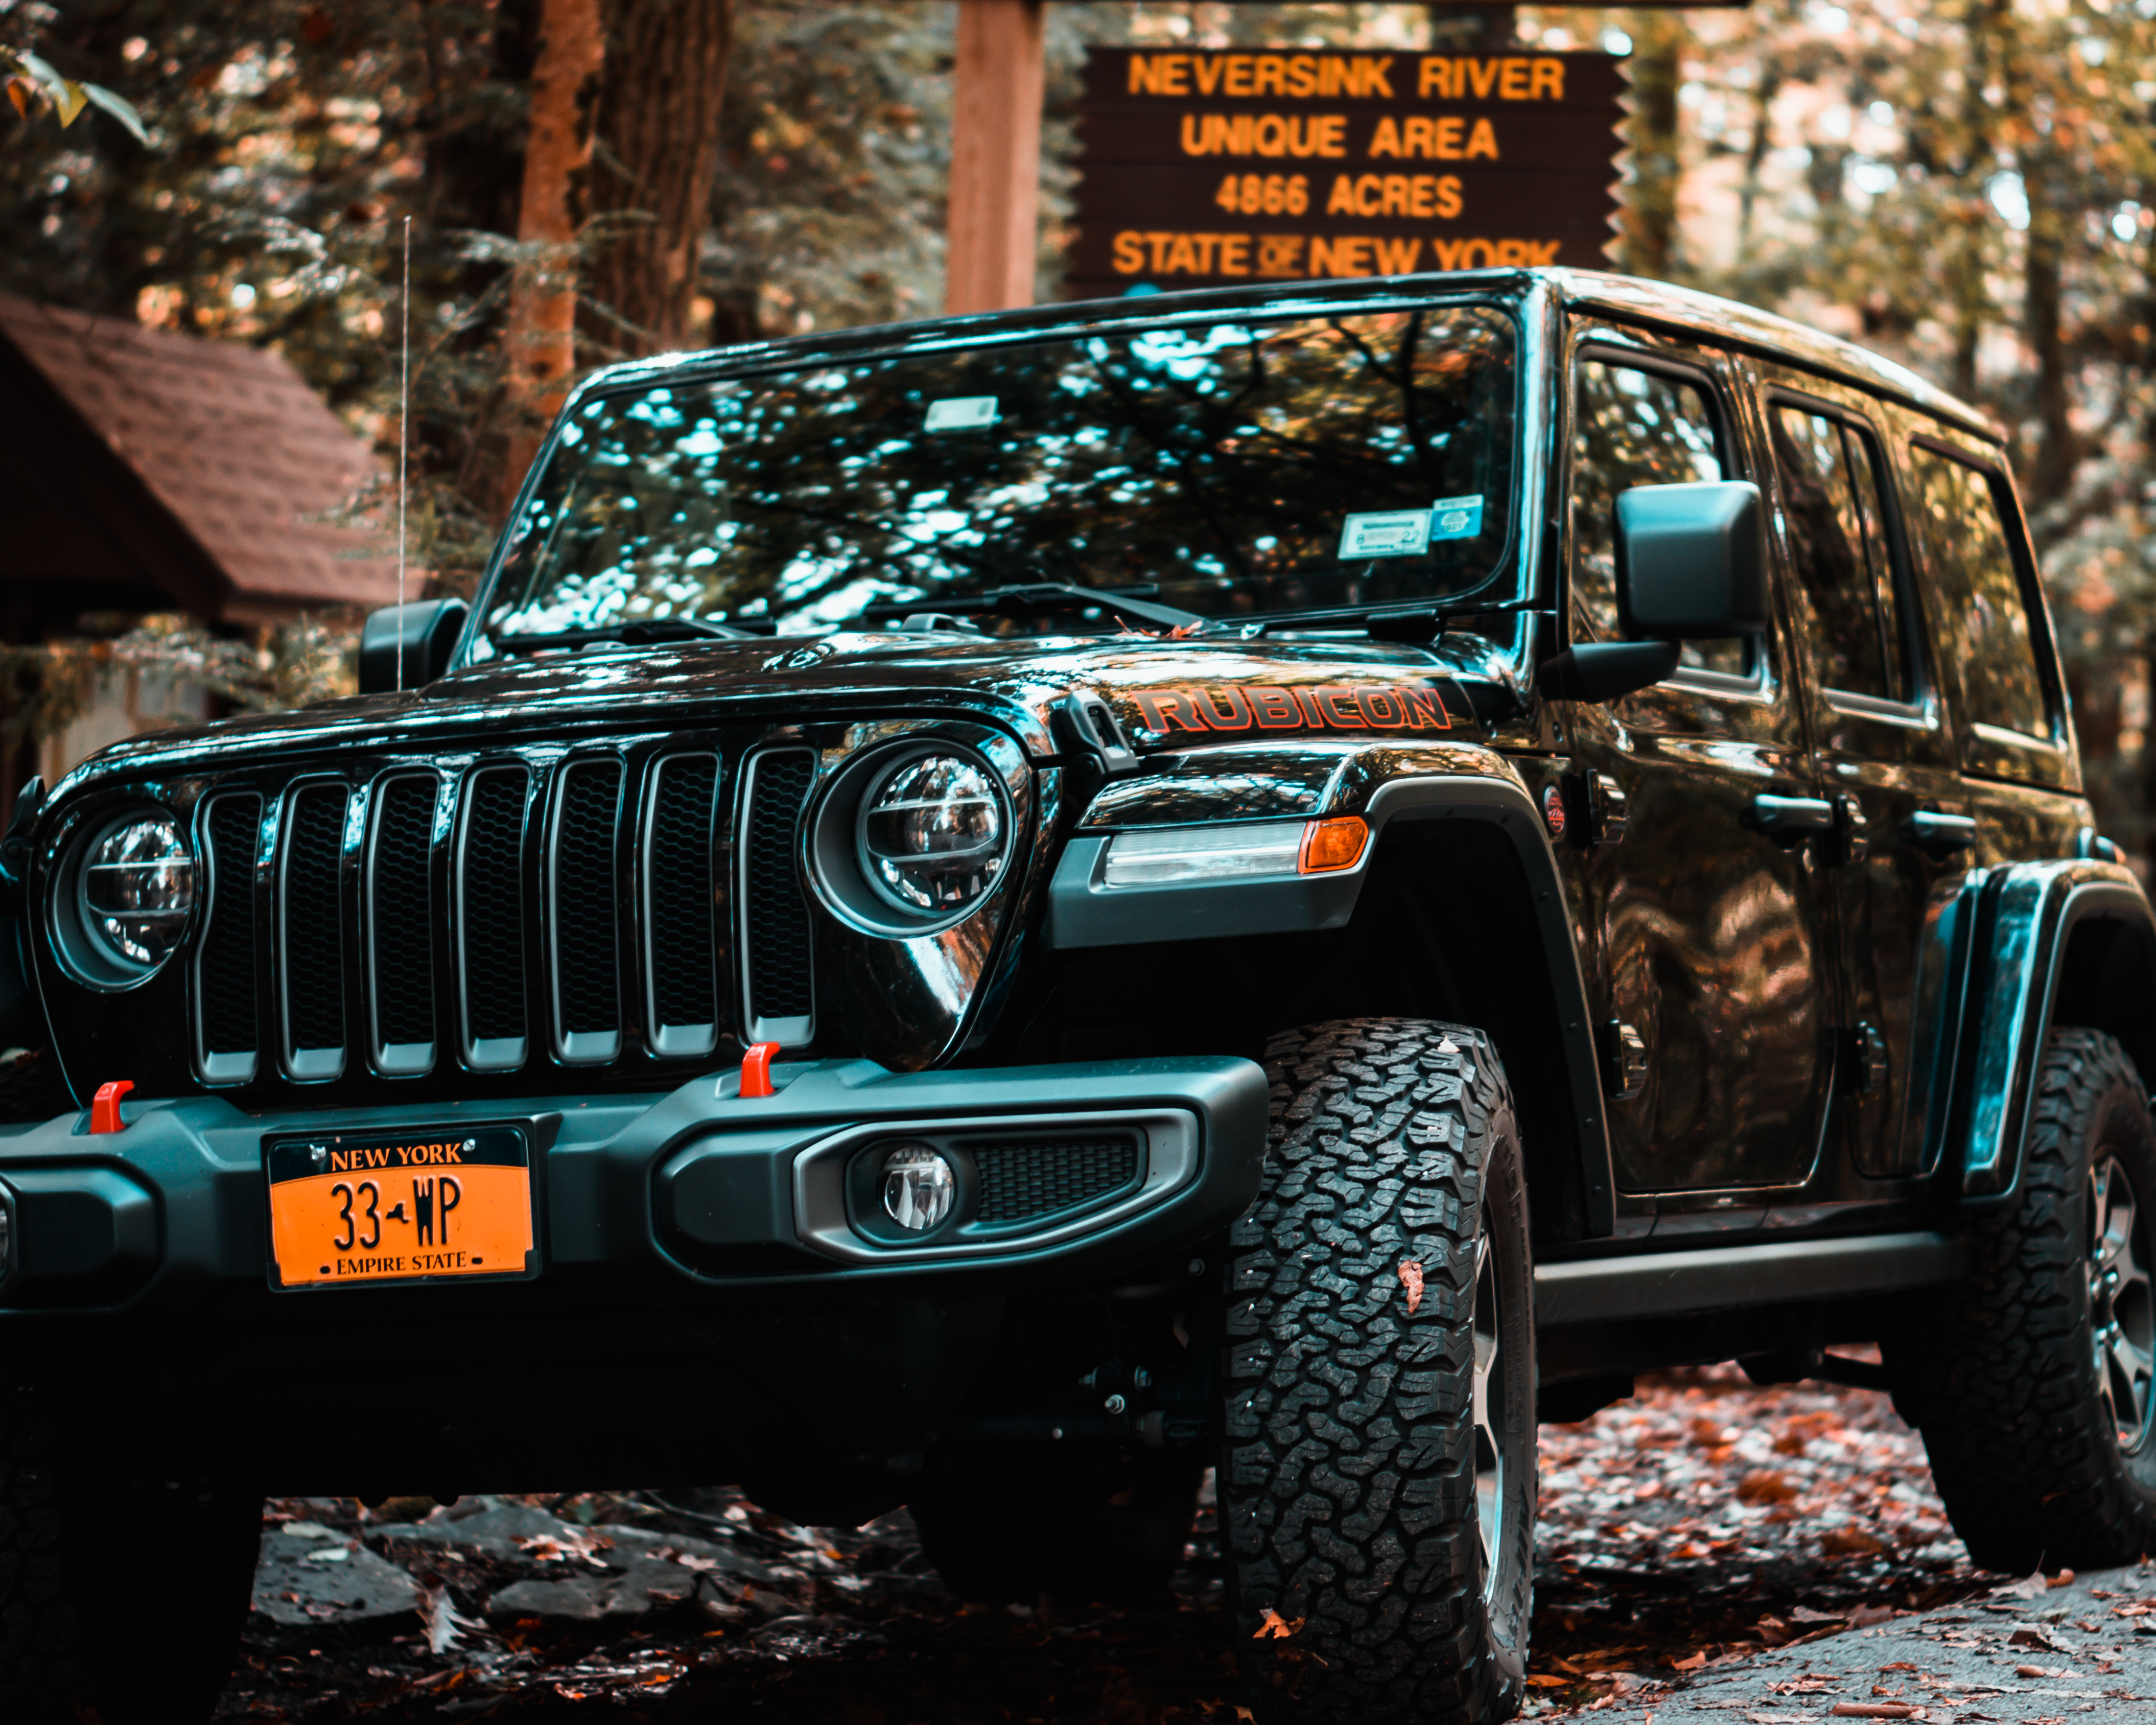 General 4220x3376 Jeep Jeep Wrangler Jeep Rubicon black cars car vehicle New York state USA signs numbers Stellantis